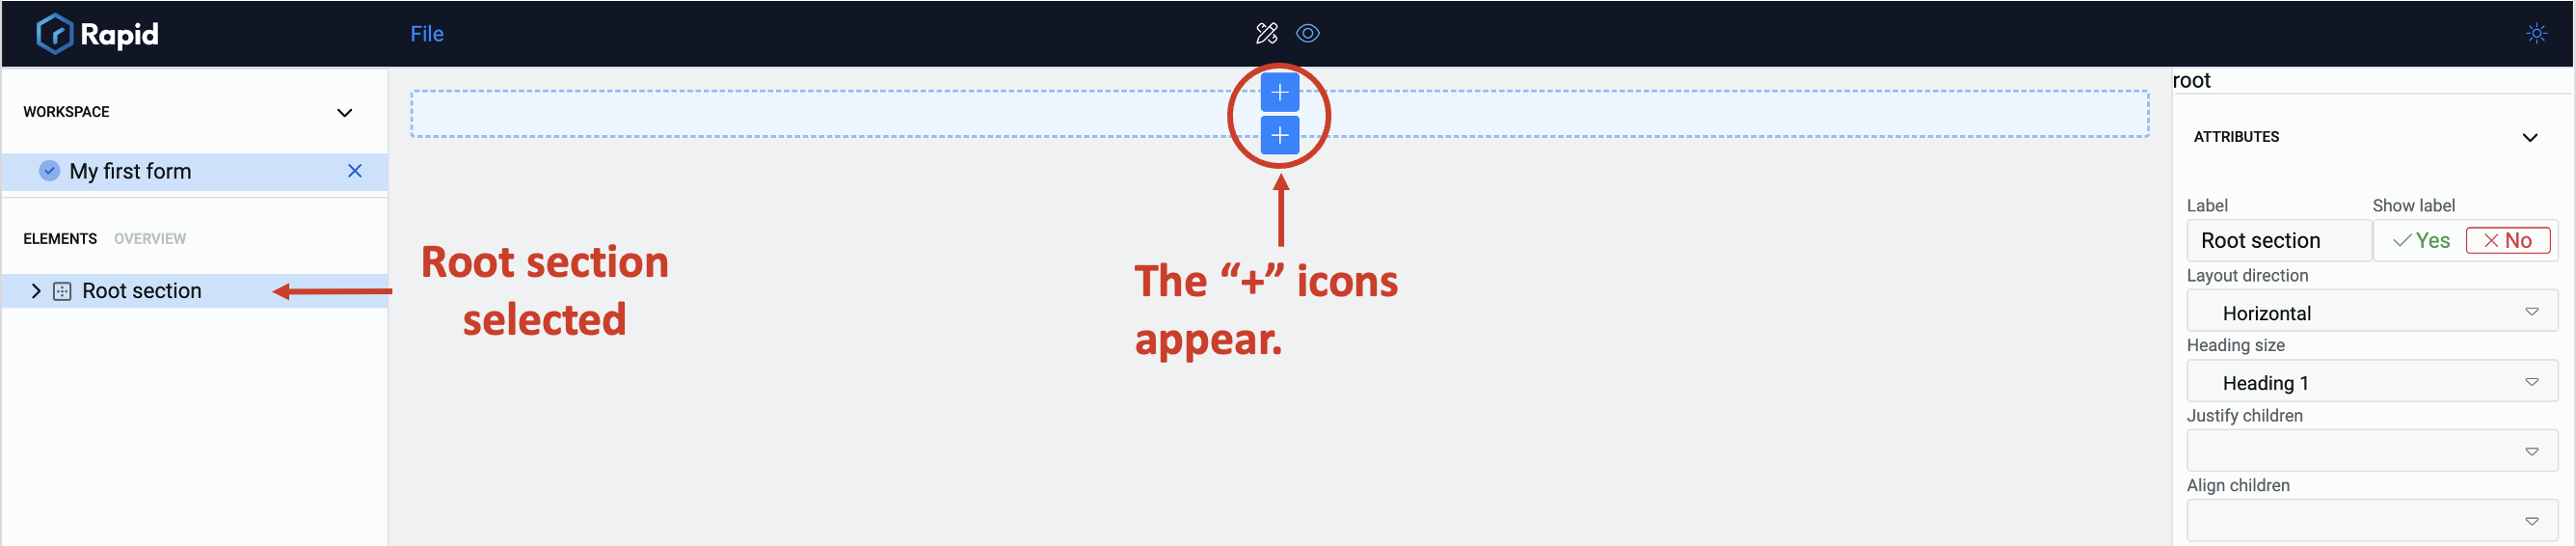 Image showing icons to add elements when section is selected